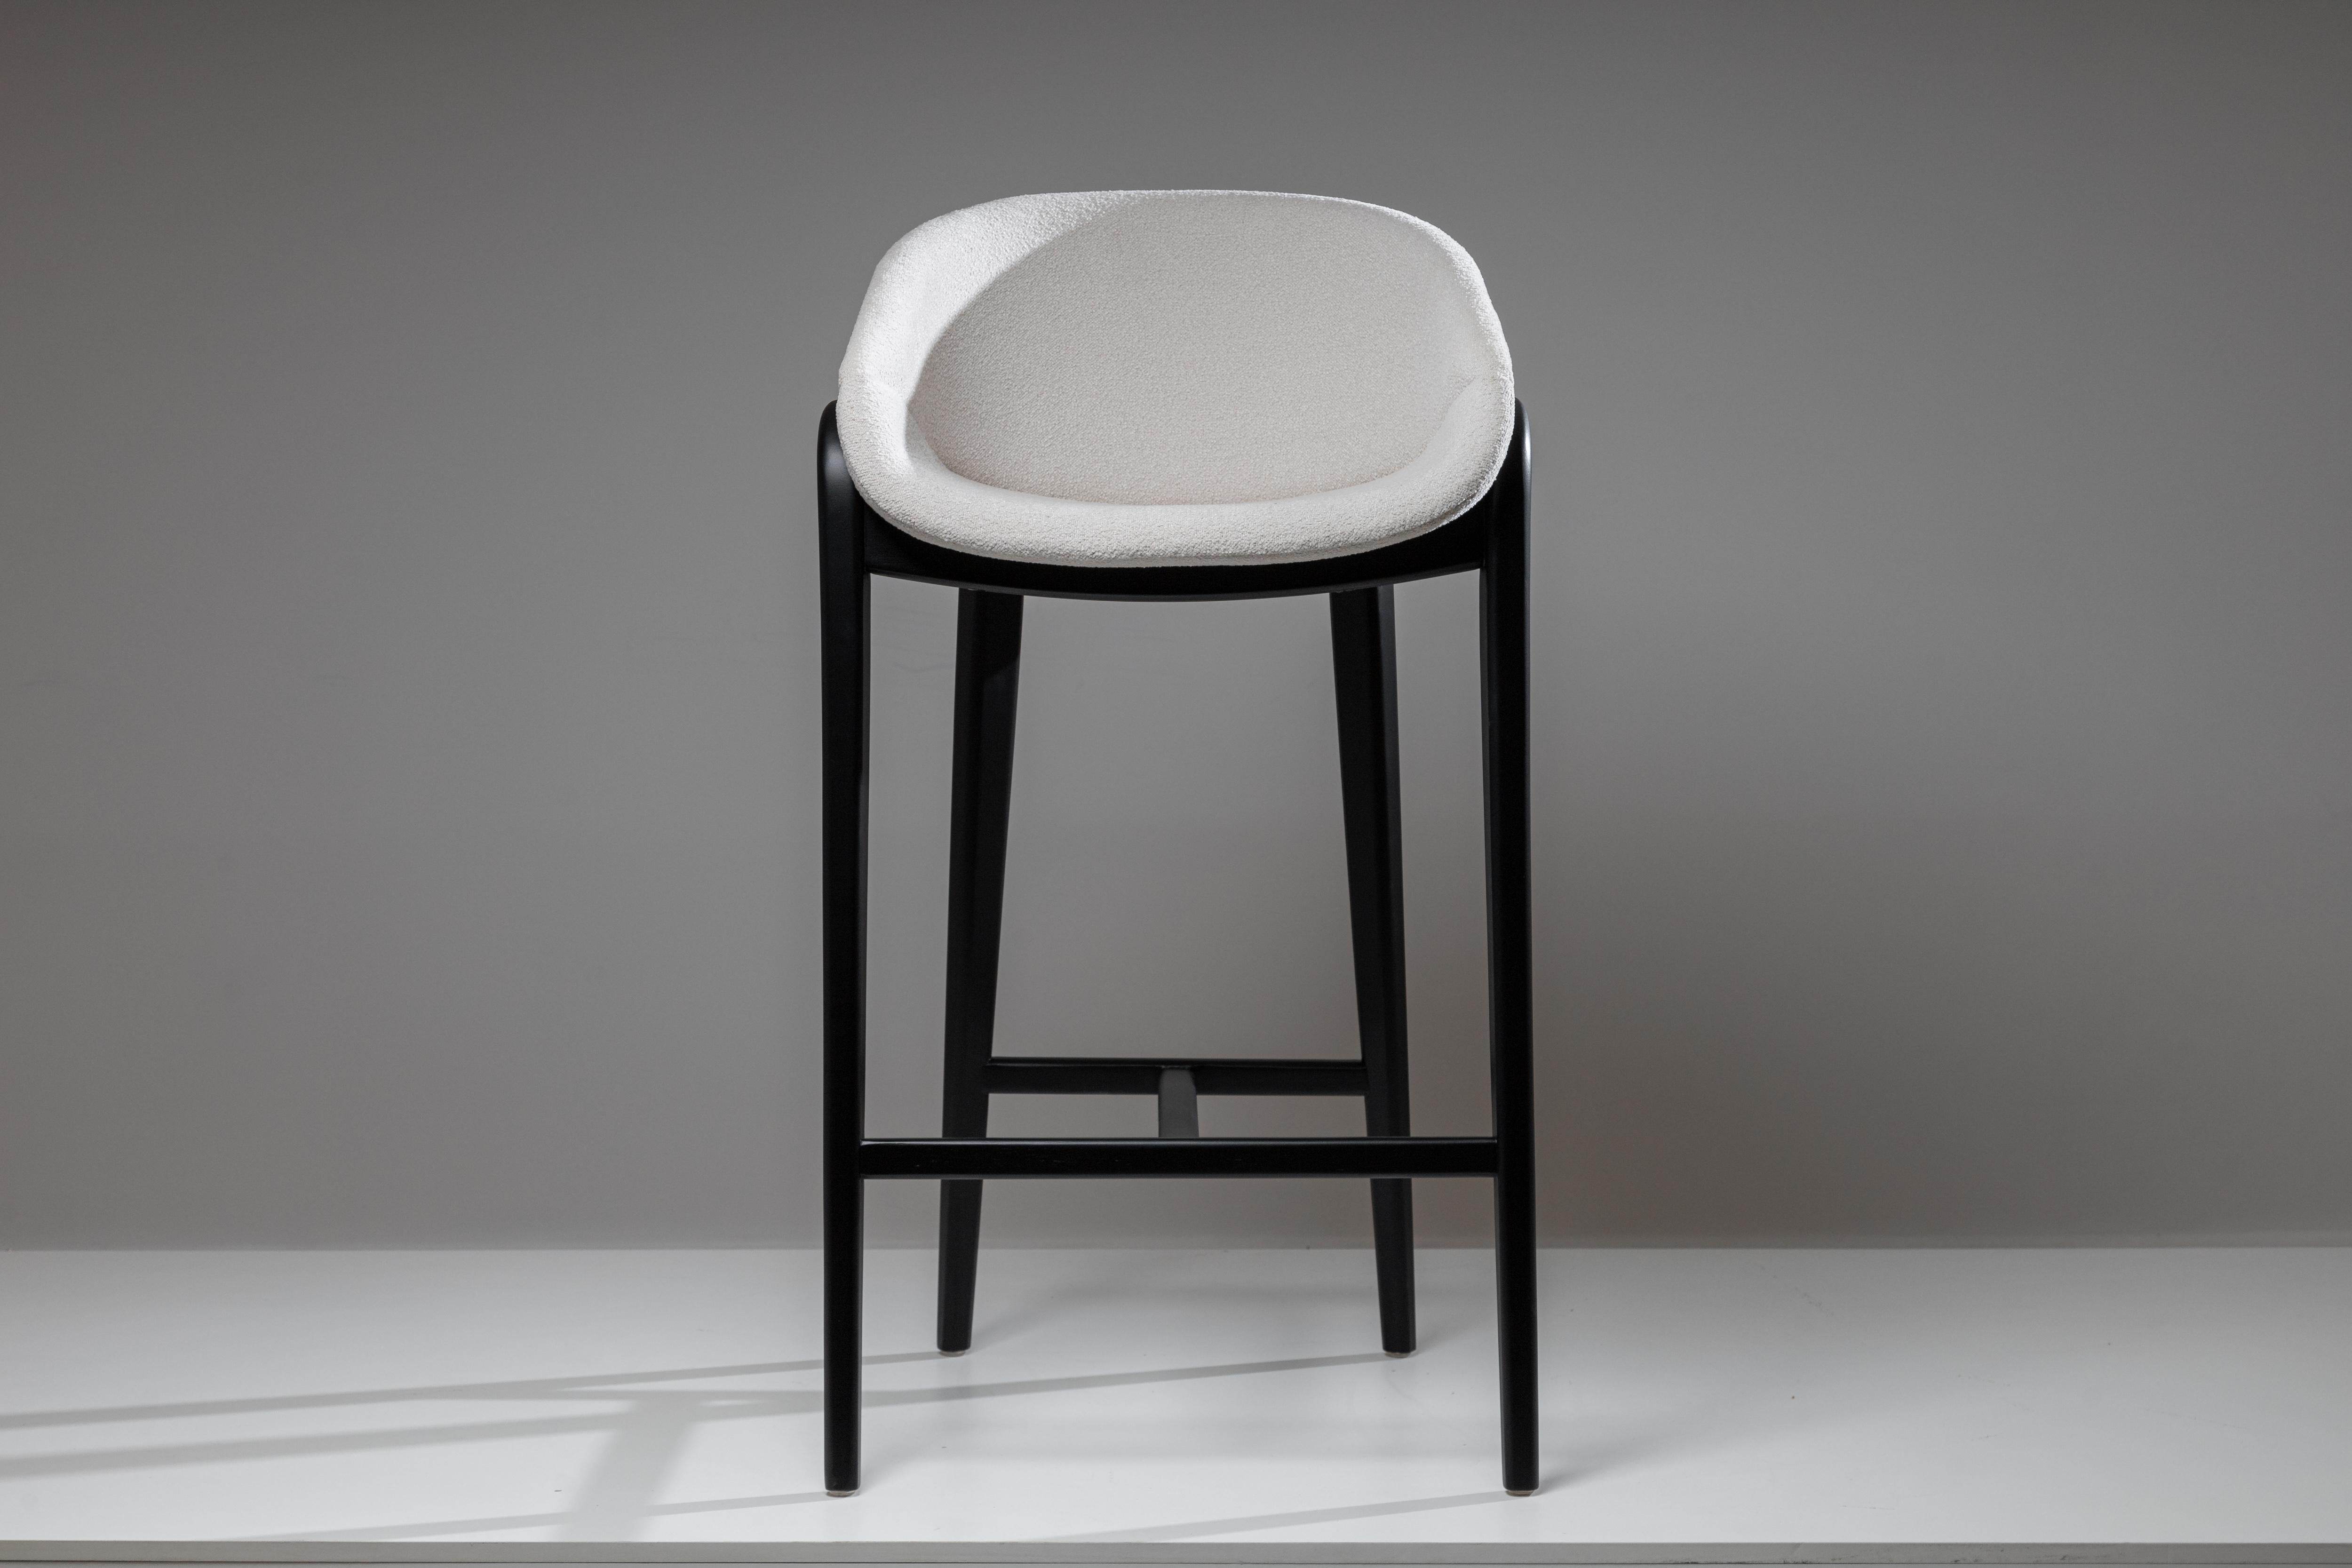 This series, composed of a chair and stools in two heights, has its generating line defined by a central arch that simultaneously divides and defines the seat and the backrest.
In a strategy of articulating forms that promotes the maximum of curves